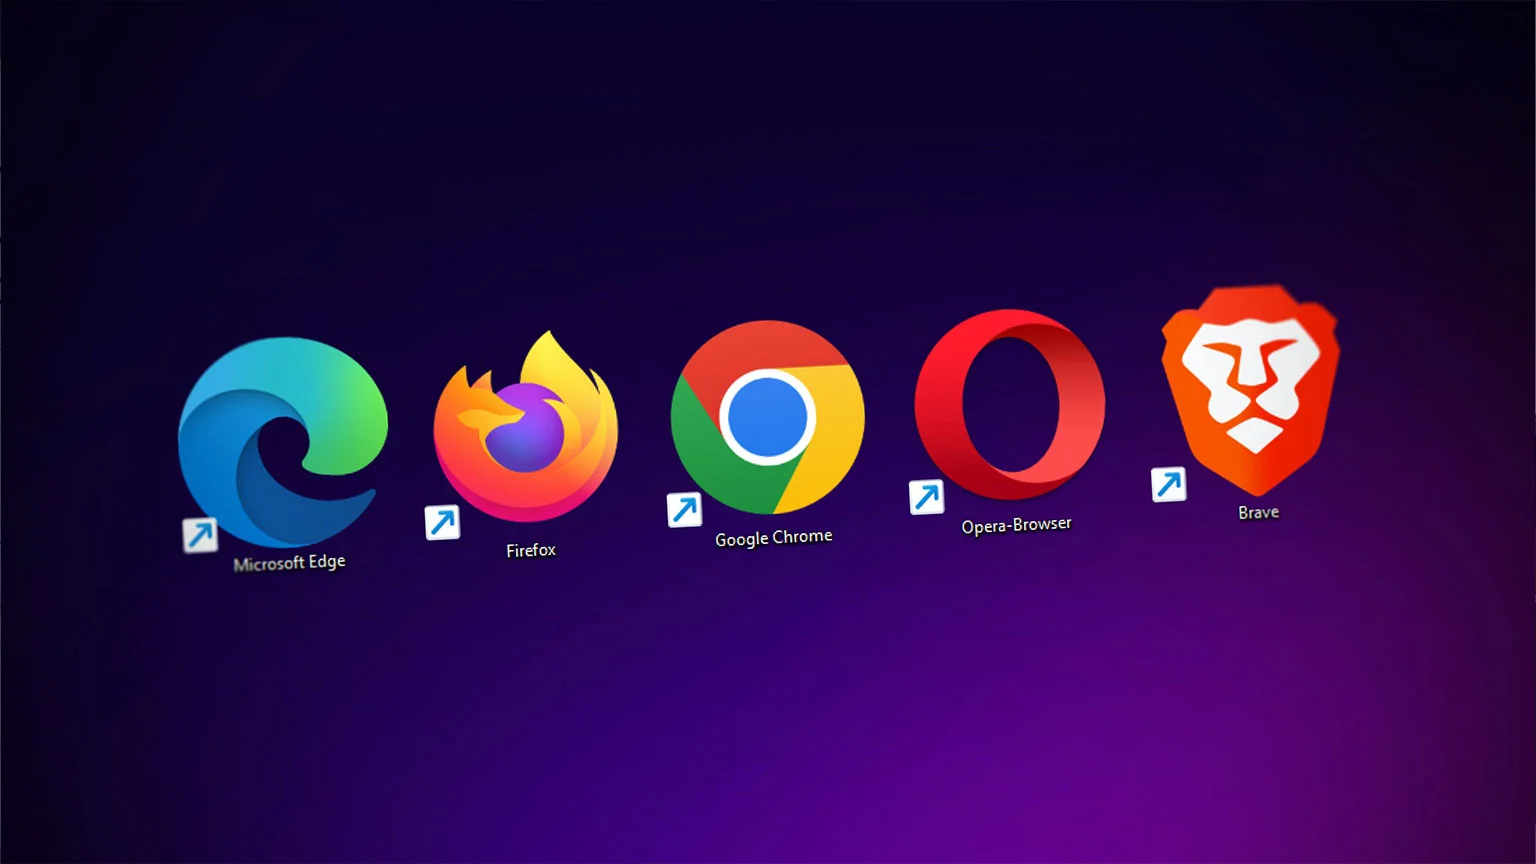 The icons of different types of web browsers.